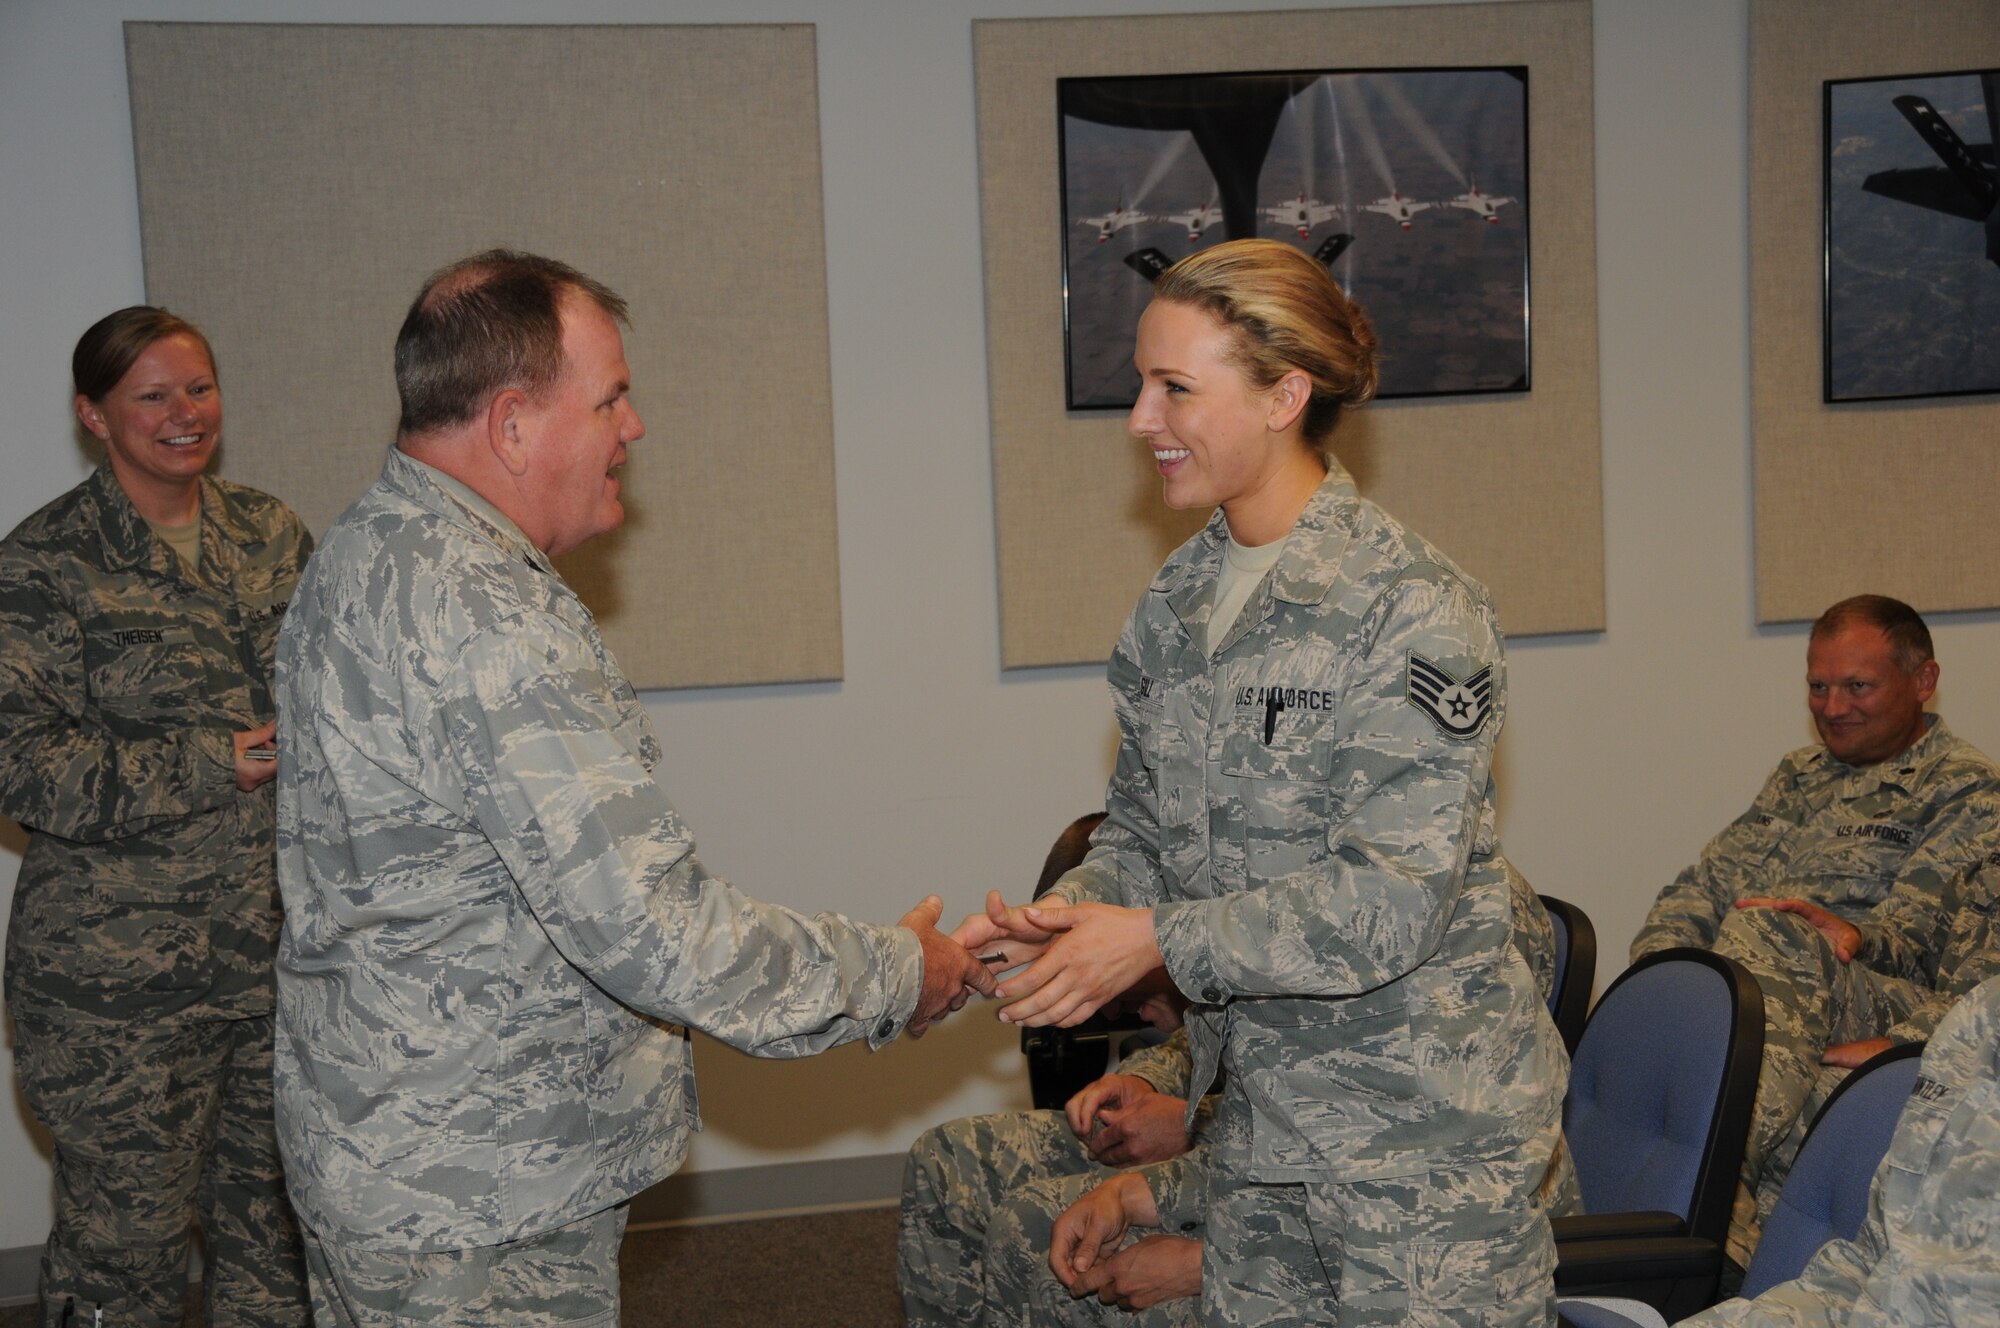 Staff Sgt. Keely Gill recieves a coin from Col. Brian Miller for scoring 100 percent on her 2012 fitness test at the 185th Air Refueling Wing Air Base in Sioux City, IA July 14, 2013. (U.S. Air Guard photo by 1LT Jeremy J. McClure/Released)